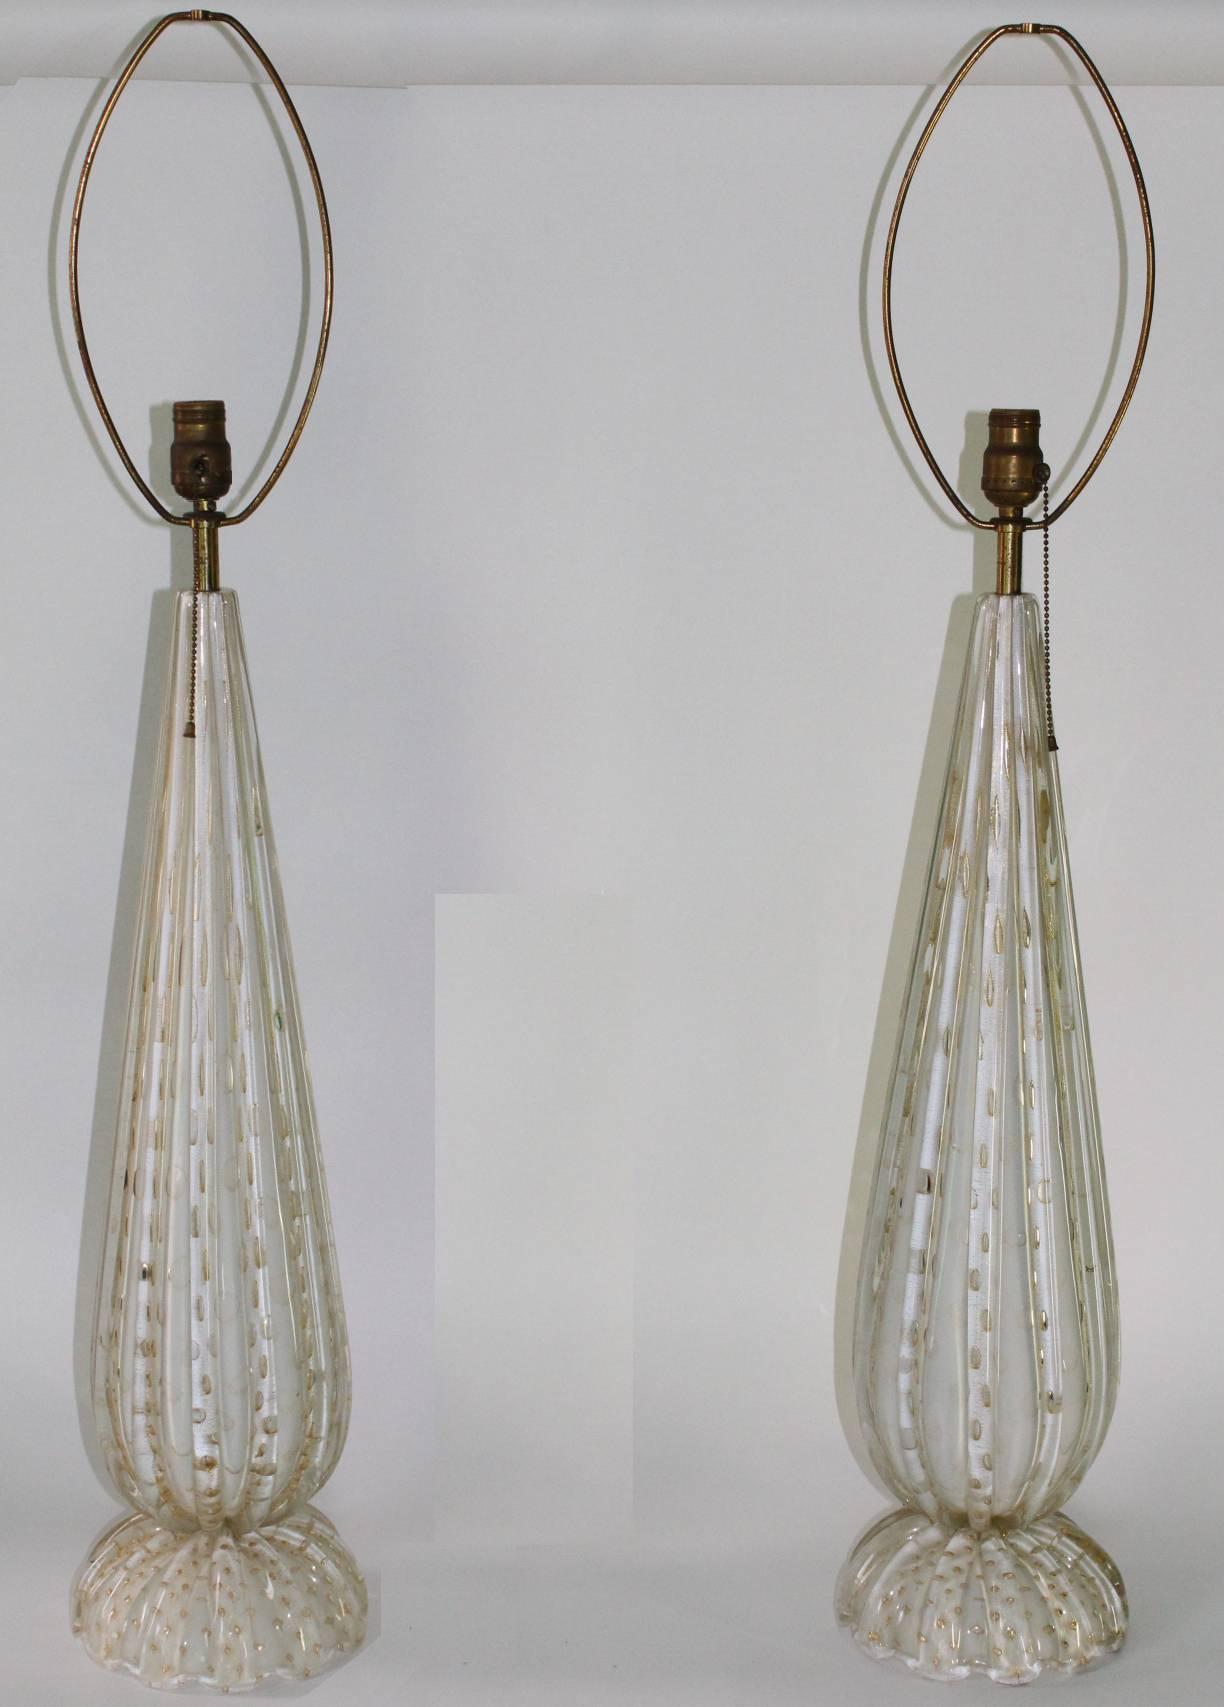 Murano glass table lamps with a pattern of gold flakes. Features tall glass bodies with scalloped base. Wear appropriate to age and use. The pair are in good vintage condition.

The glass bodies of the lamps measure 27.75